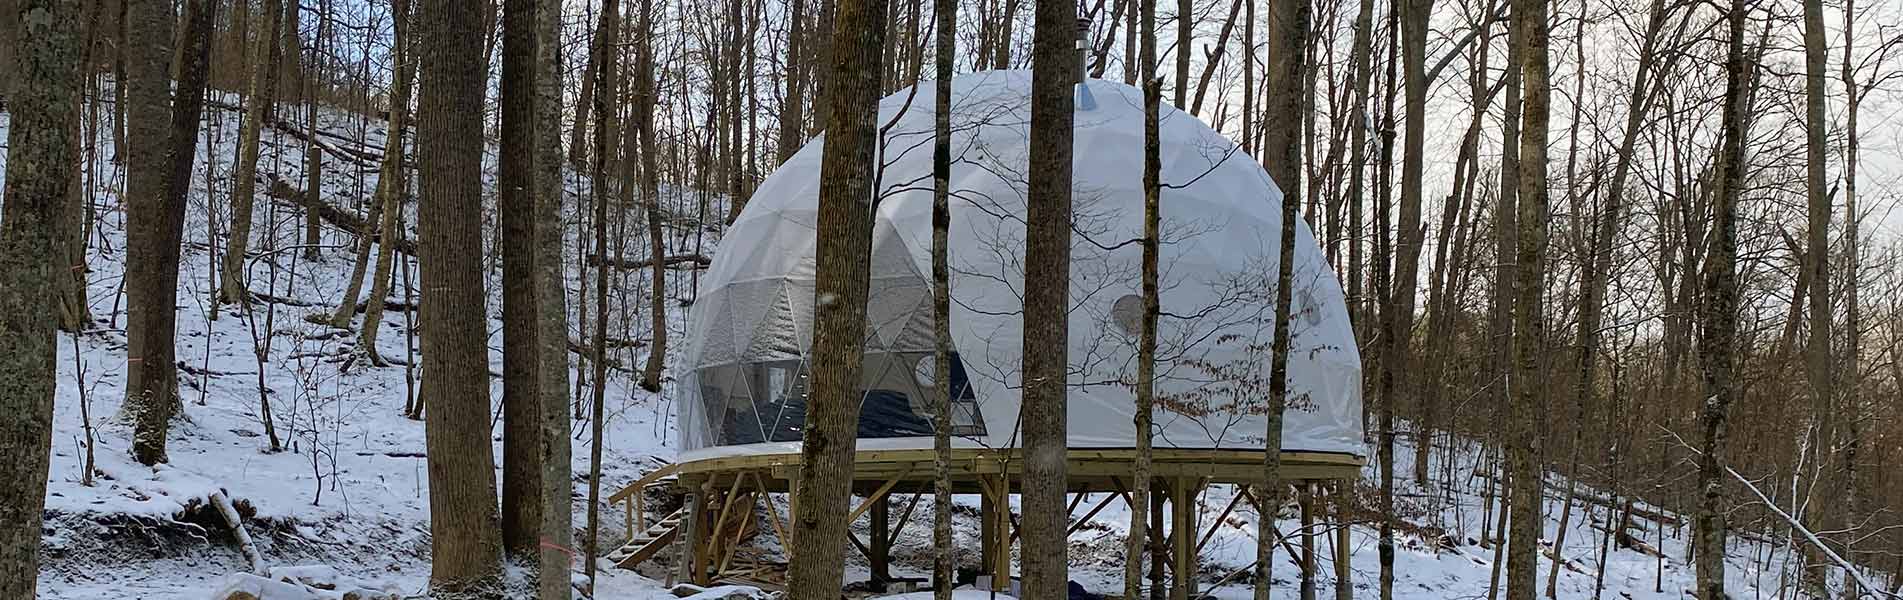 36 ft. dome home